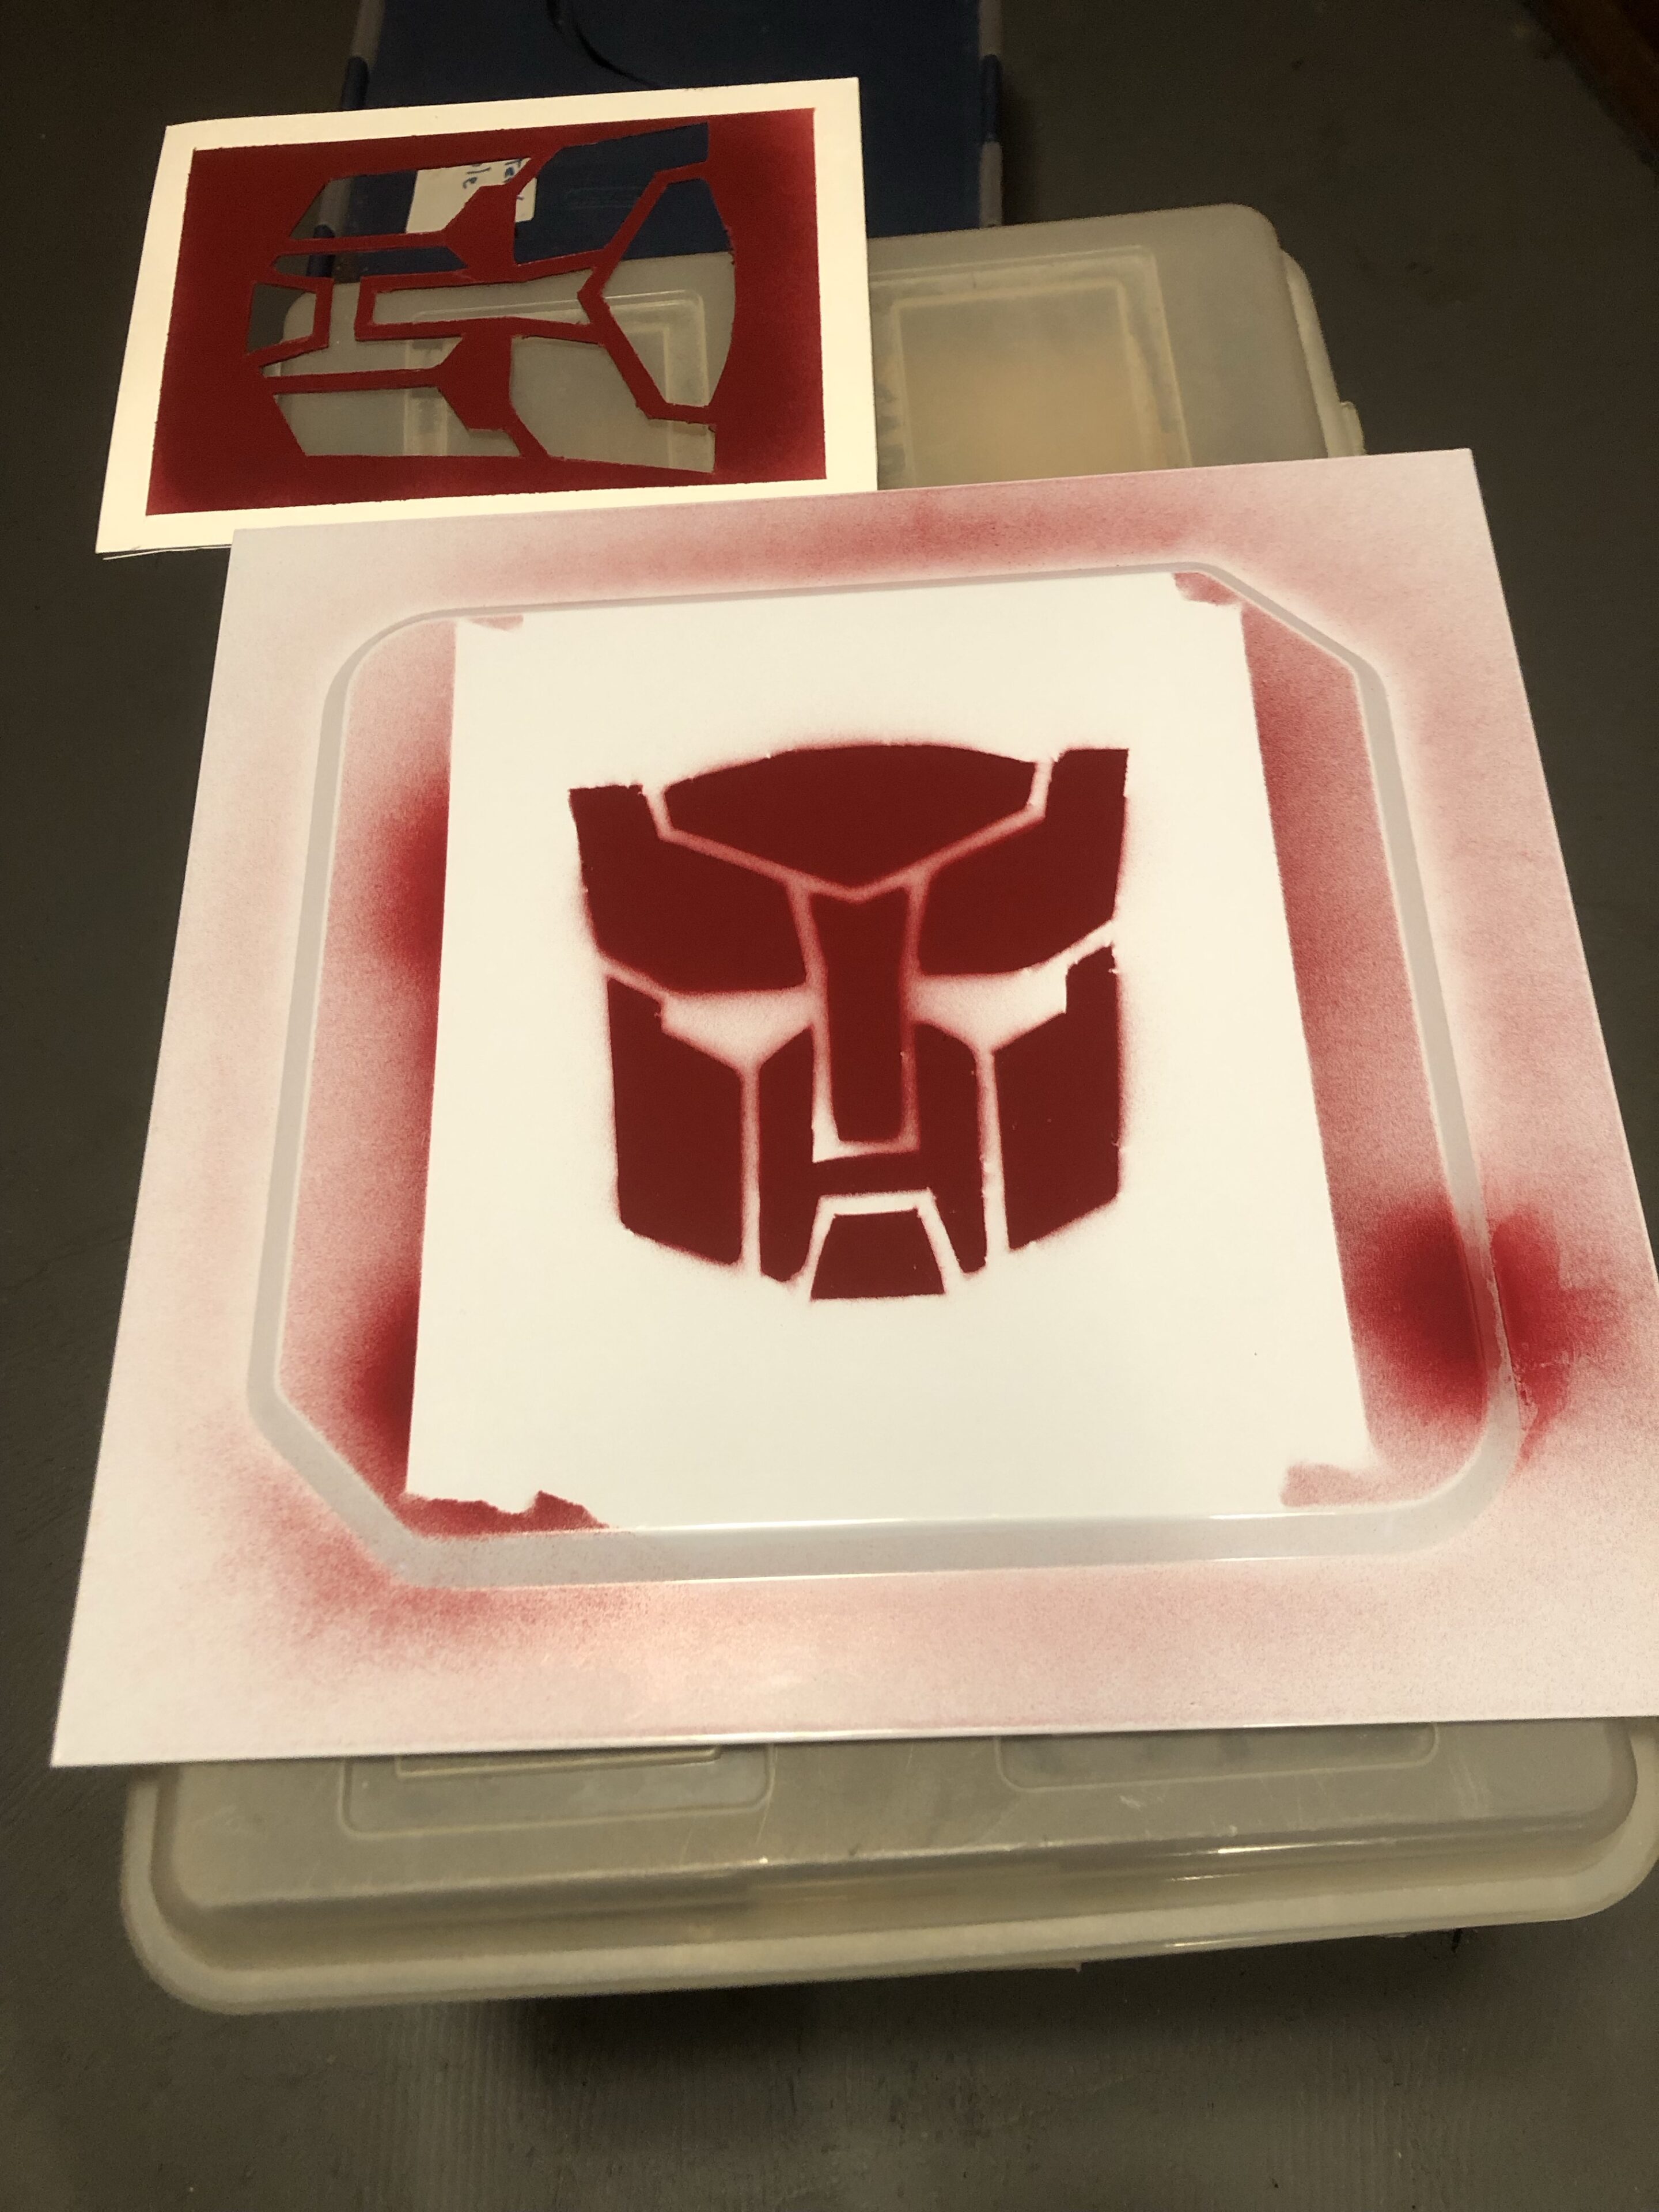 Stenciled autobot symbol on a computer case side